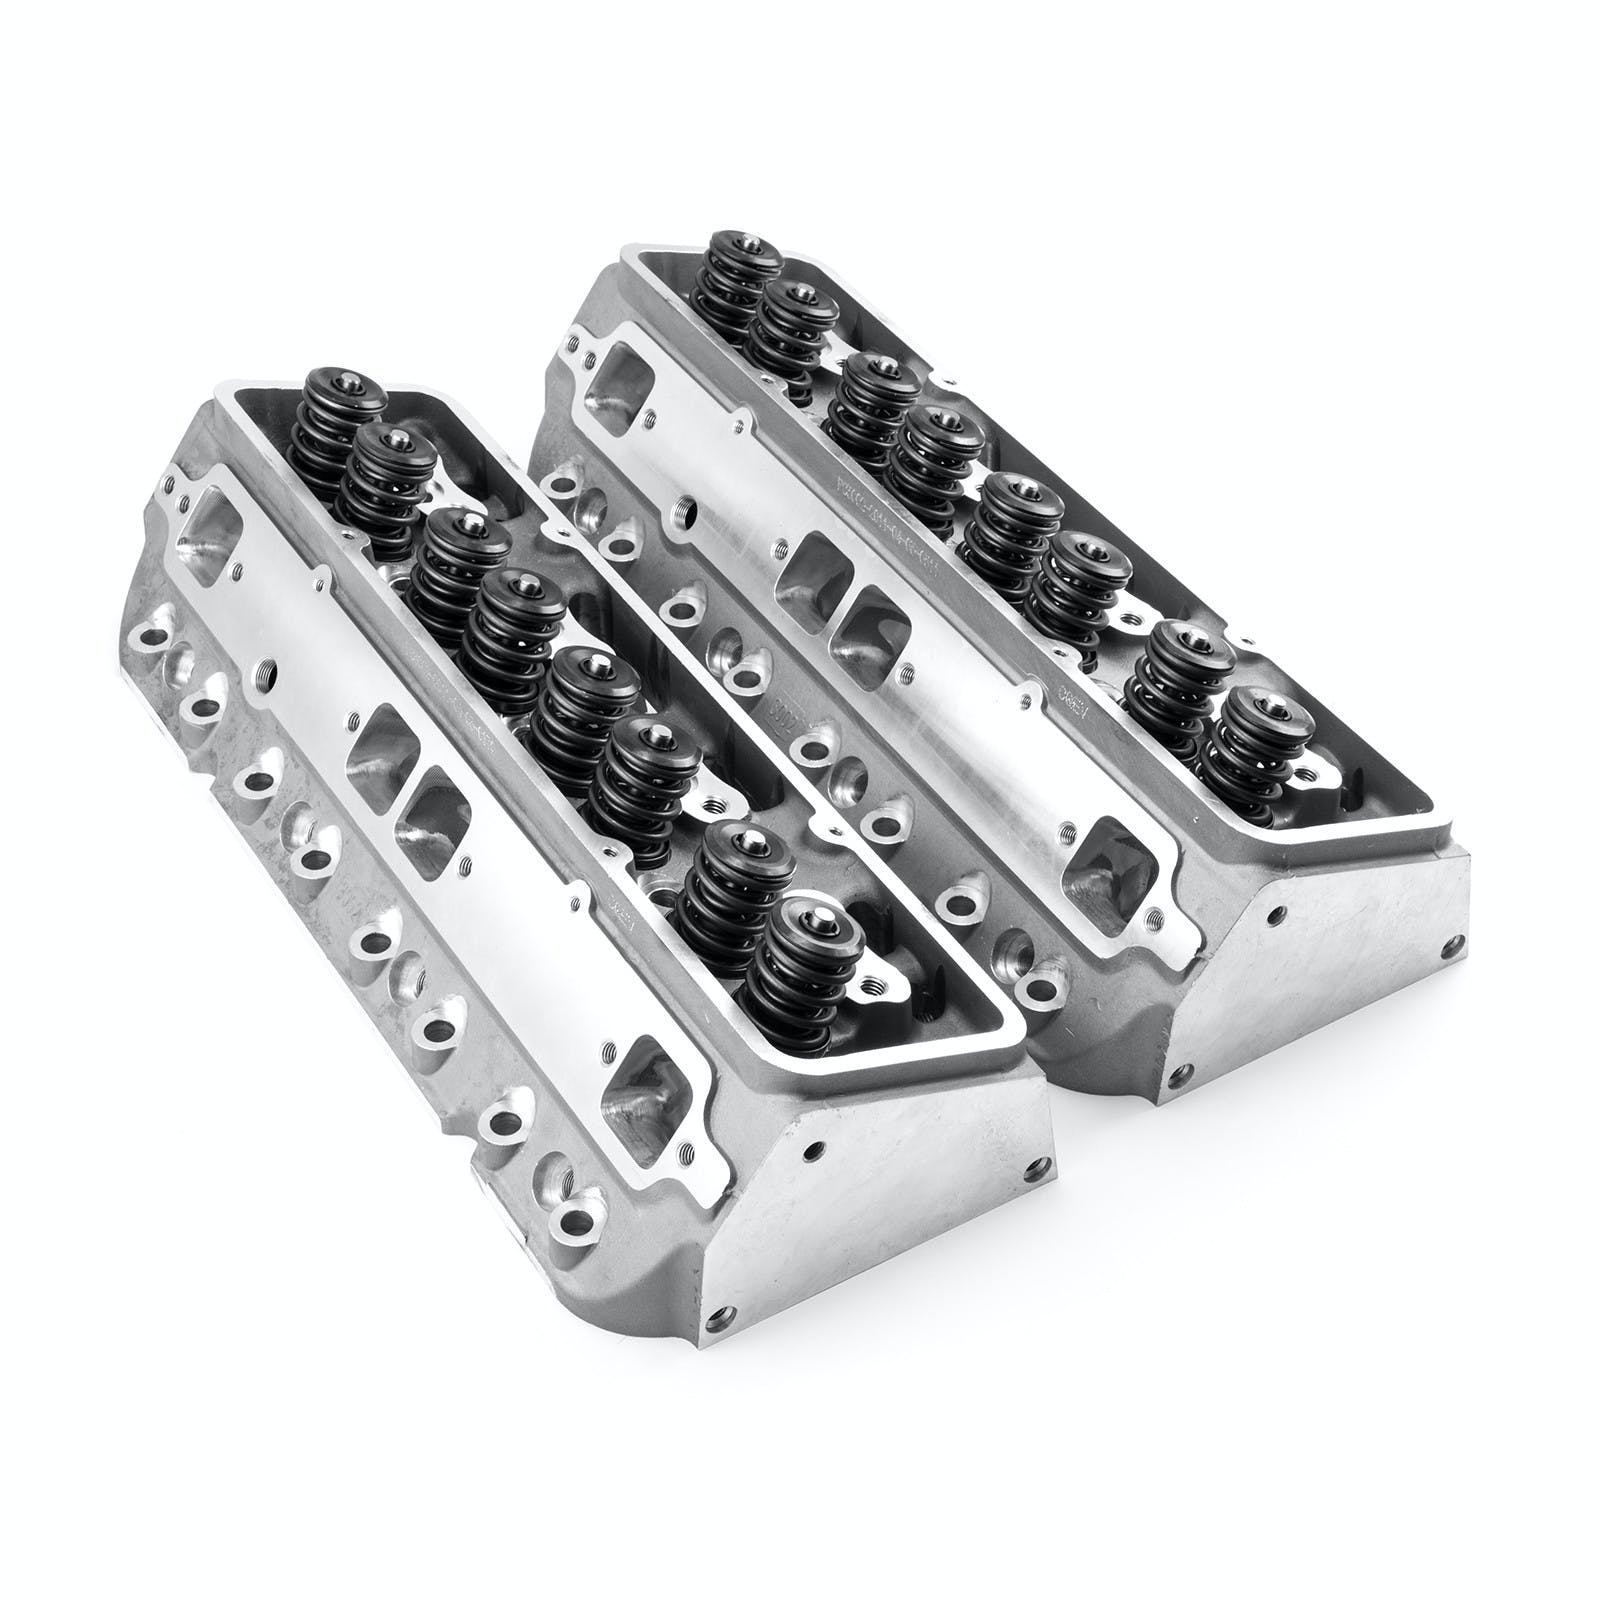 Speedmaster PCE281.2025 217cc 70cc Straight CNC Solid-FT Complete Aluminum Cylinder Heads